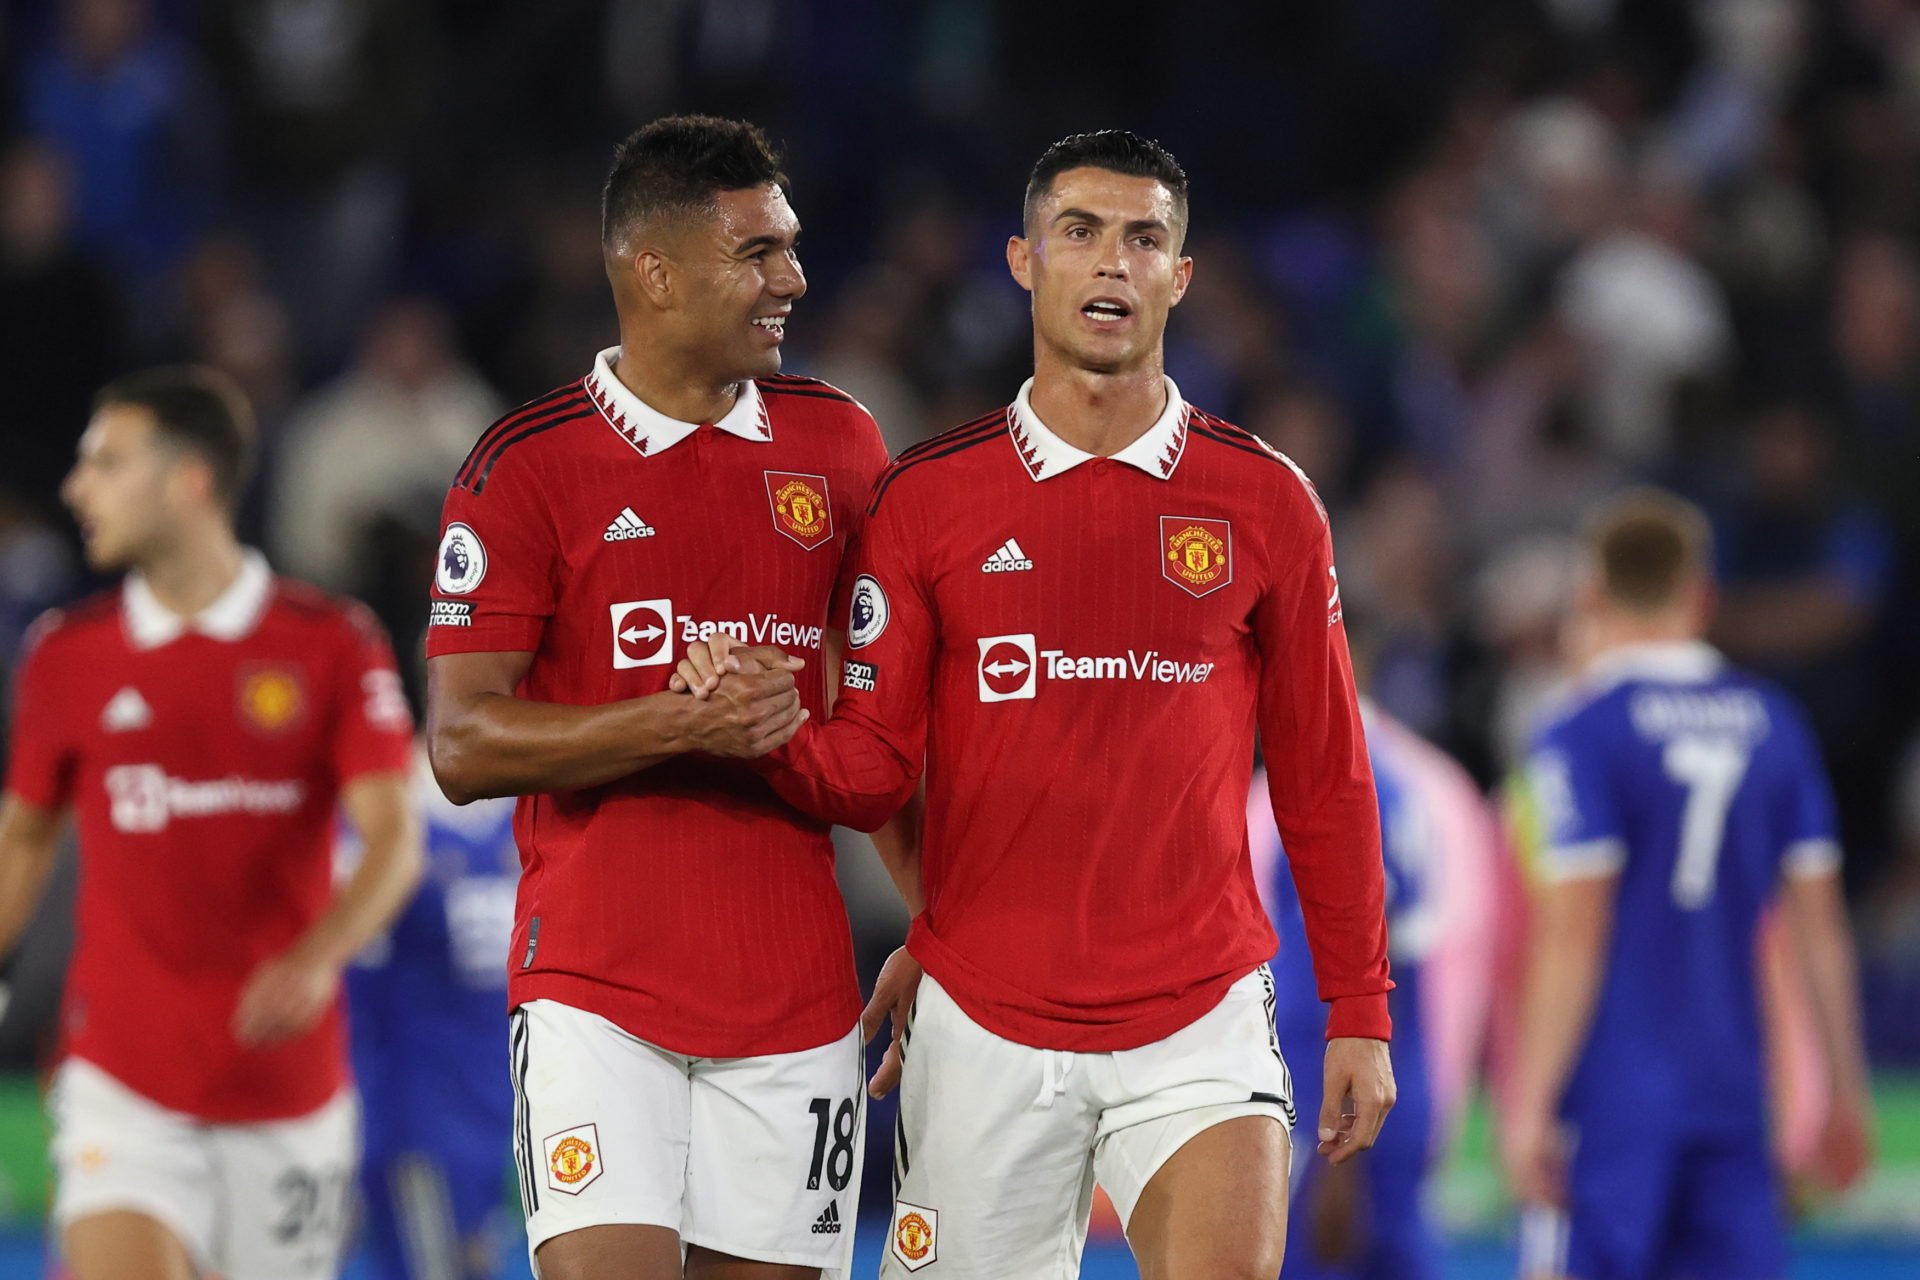 Casemiro and Ronaldo send messages to Manchester United fans